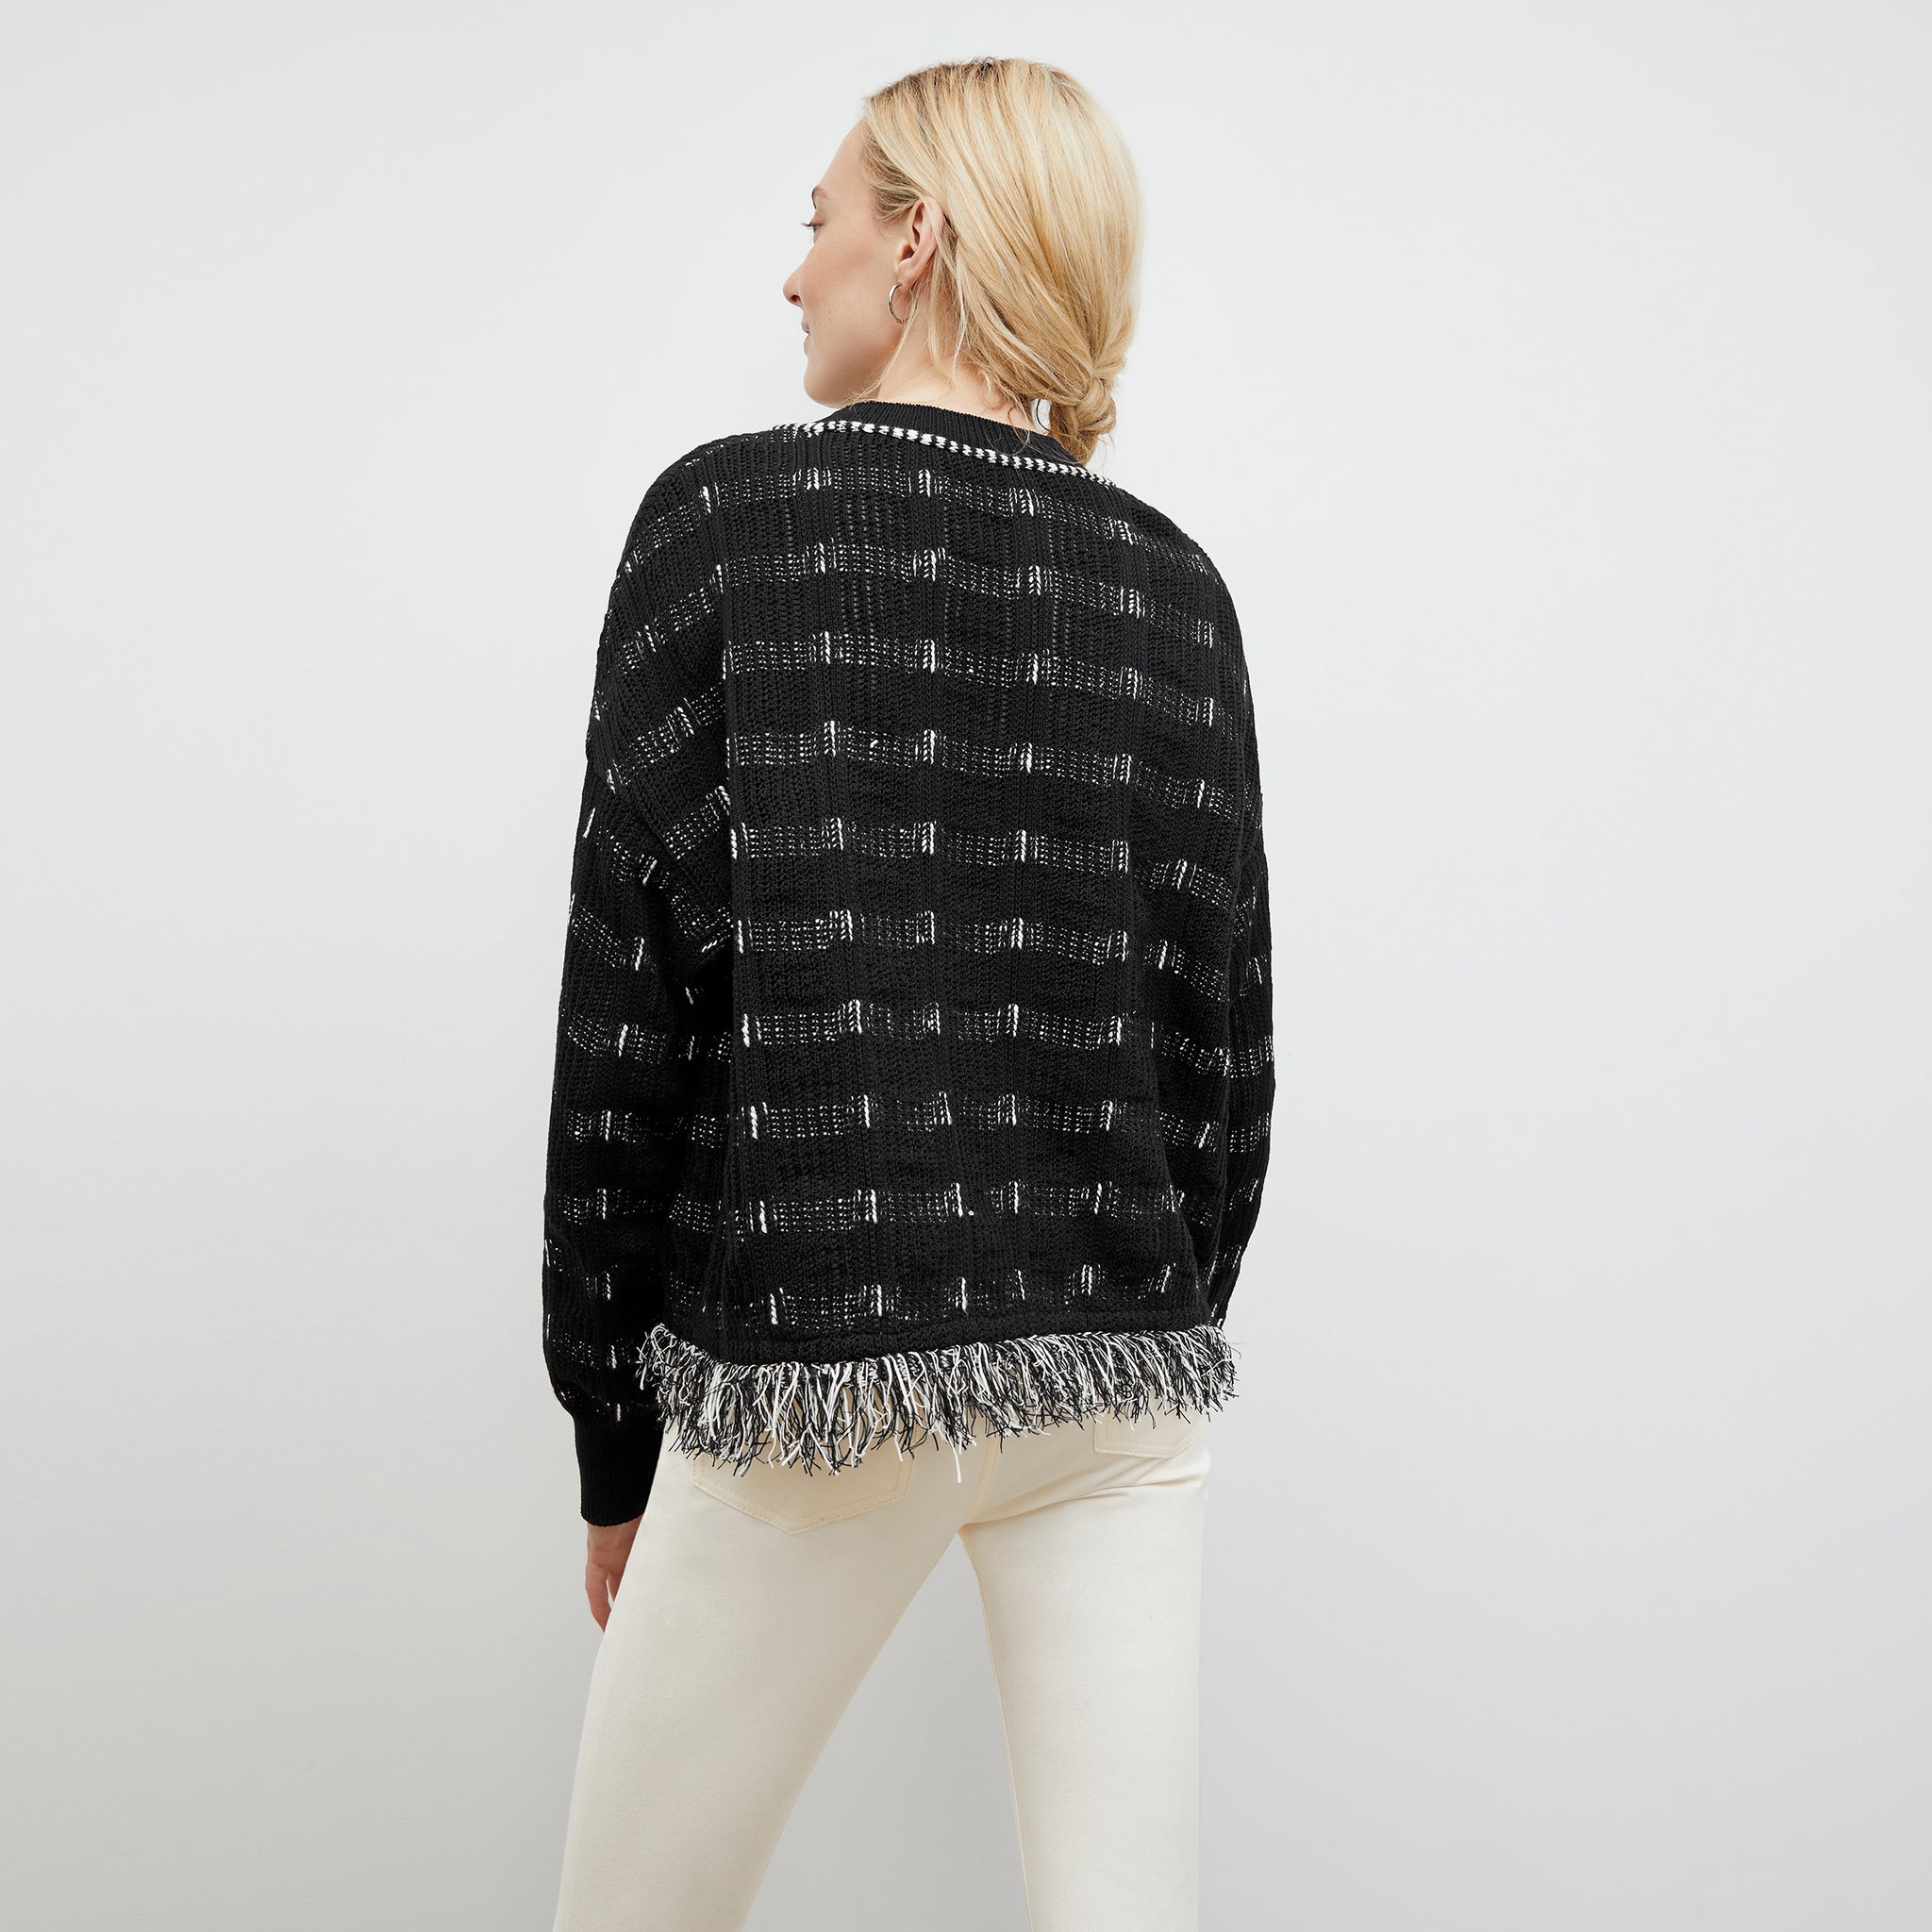 Back image of a woman wearing the Figari Pullover - Linear Interweave in Black / White